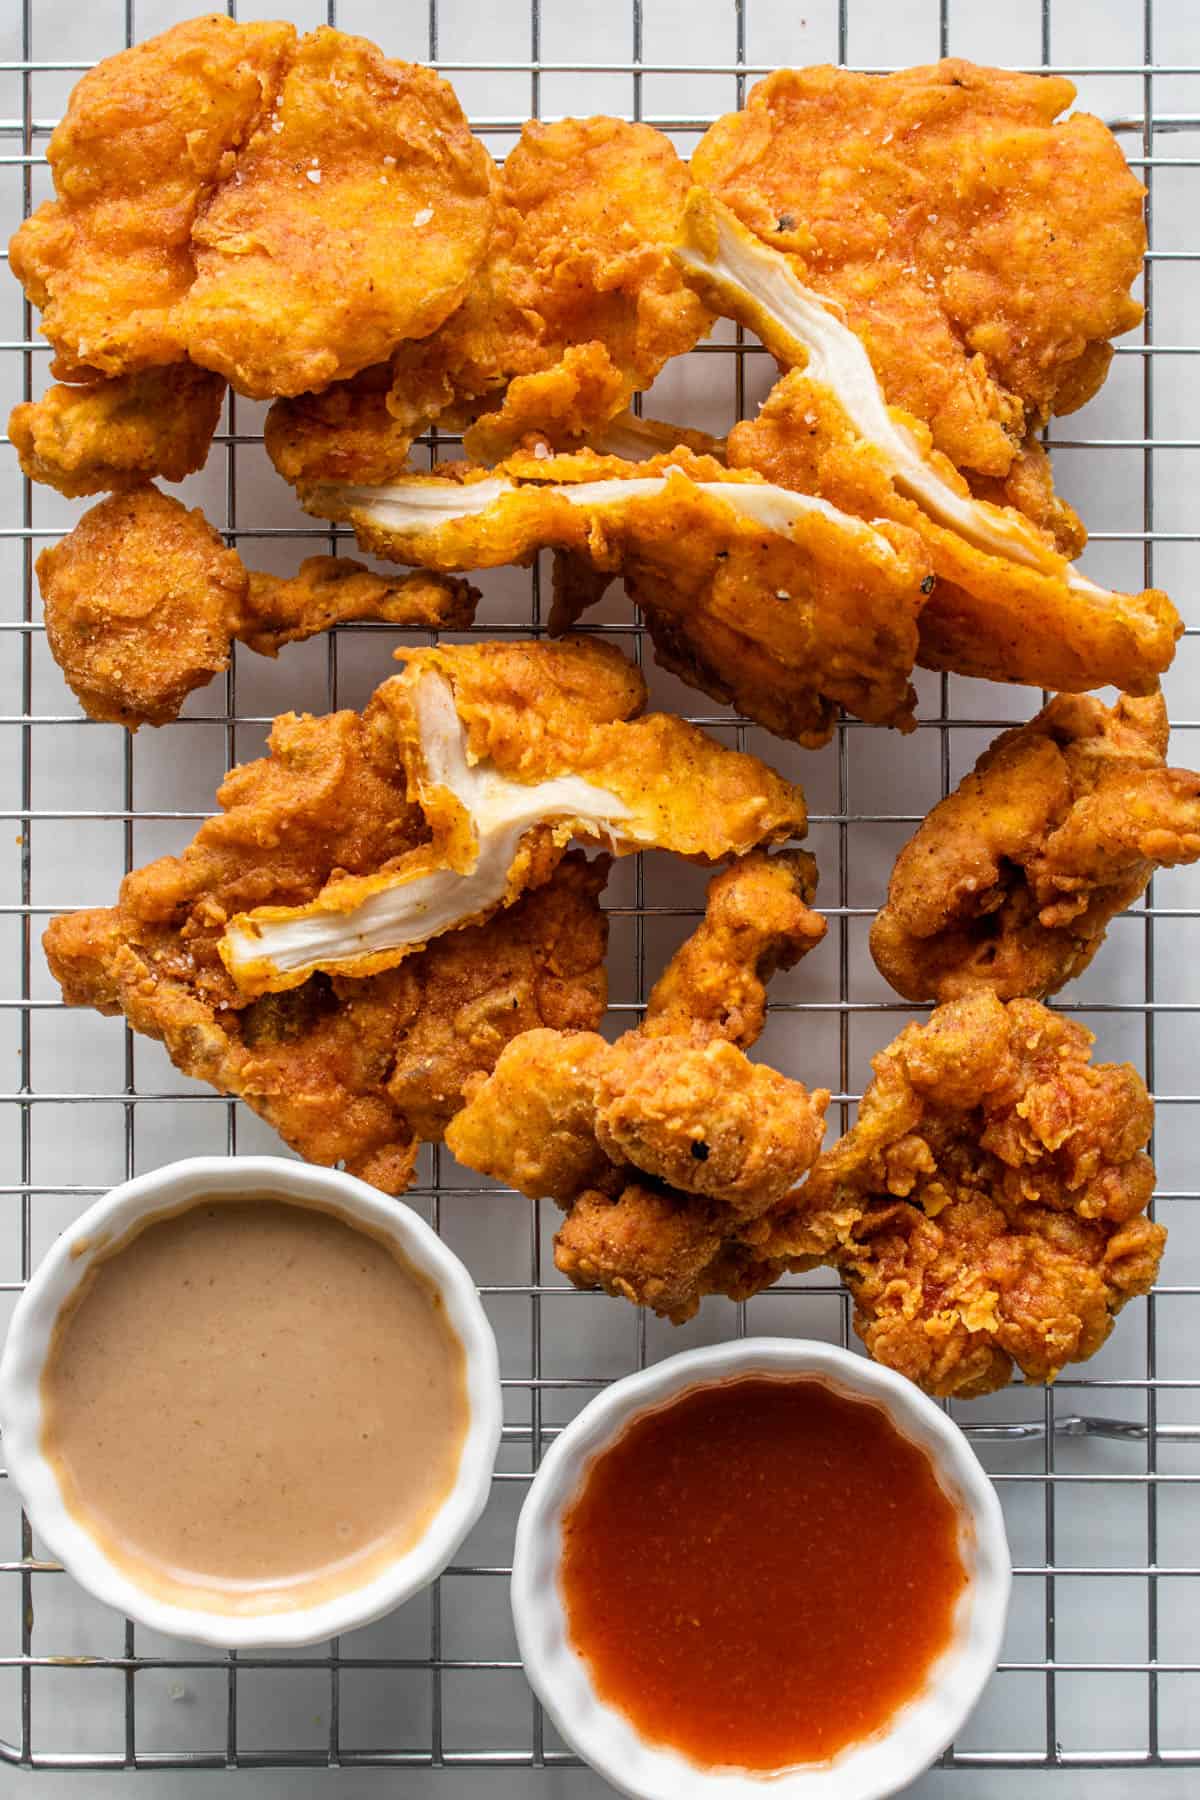 https://cookingwithayeh.com/wp-content/uploads/2022/03/Fried-Oyster-Mushrooms-Vegan-Fried-Chicken-07.jpg